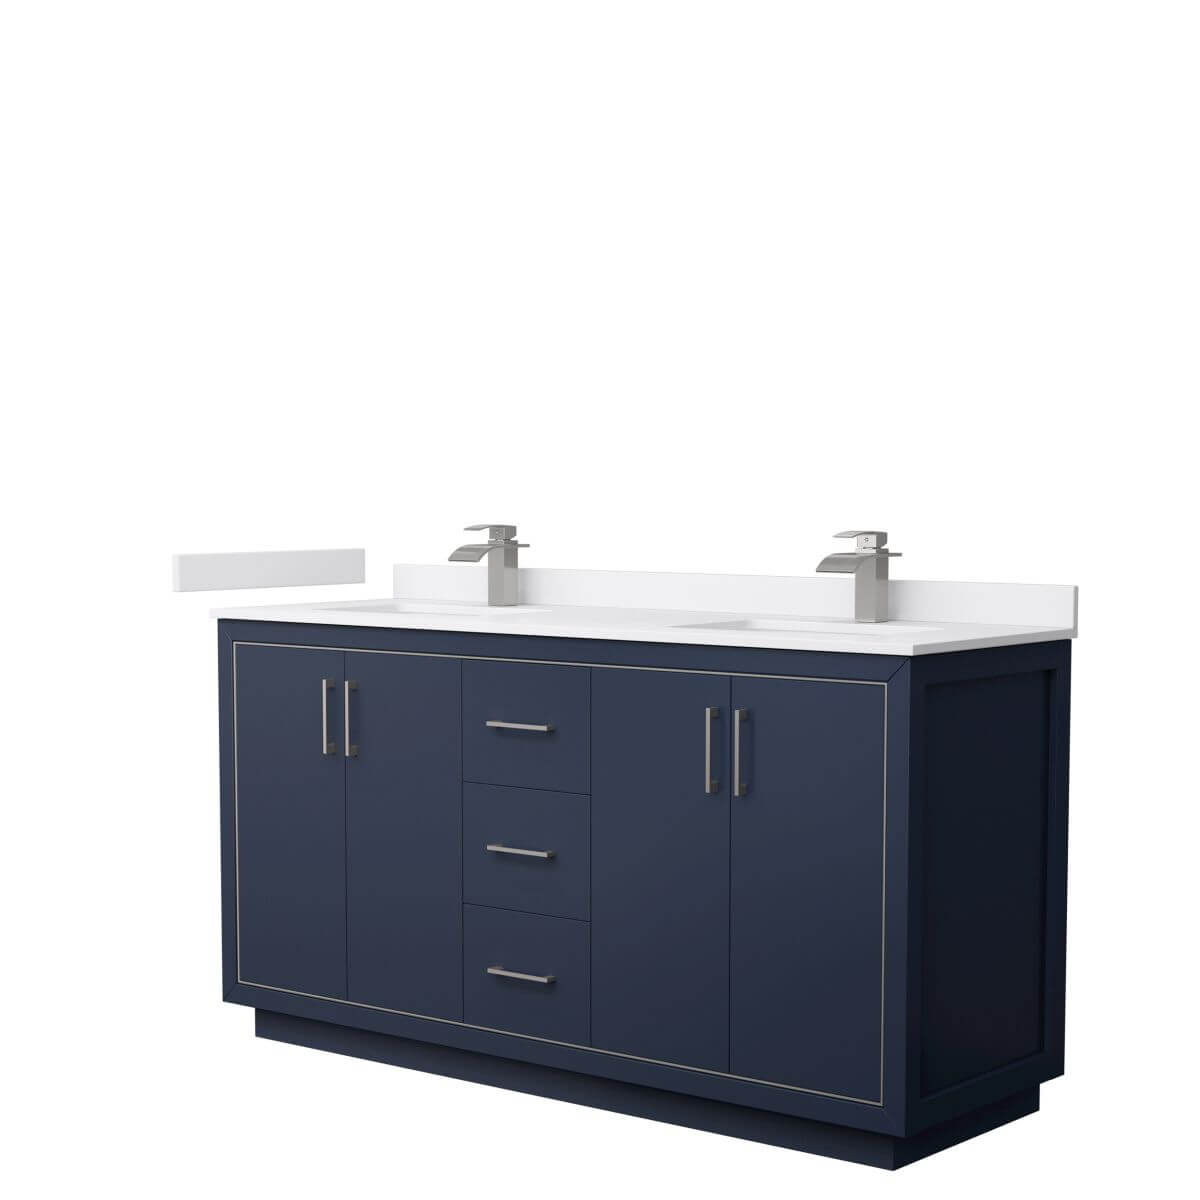 Wyndham Collection WCF111166DBNWCUNSMXX Icon 66 inch Double Bathroom Vanity in Dark Blue with White Cultured Marble Countertop, Undermount Square Sinks and Brushed Nickel Trim